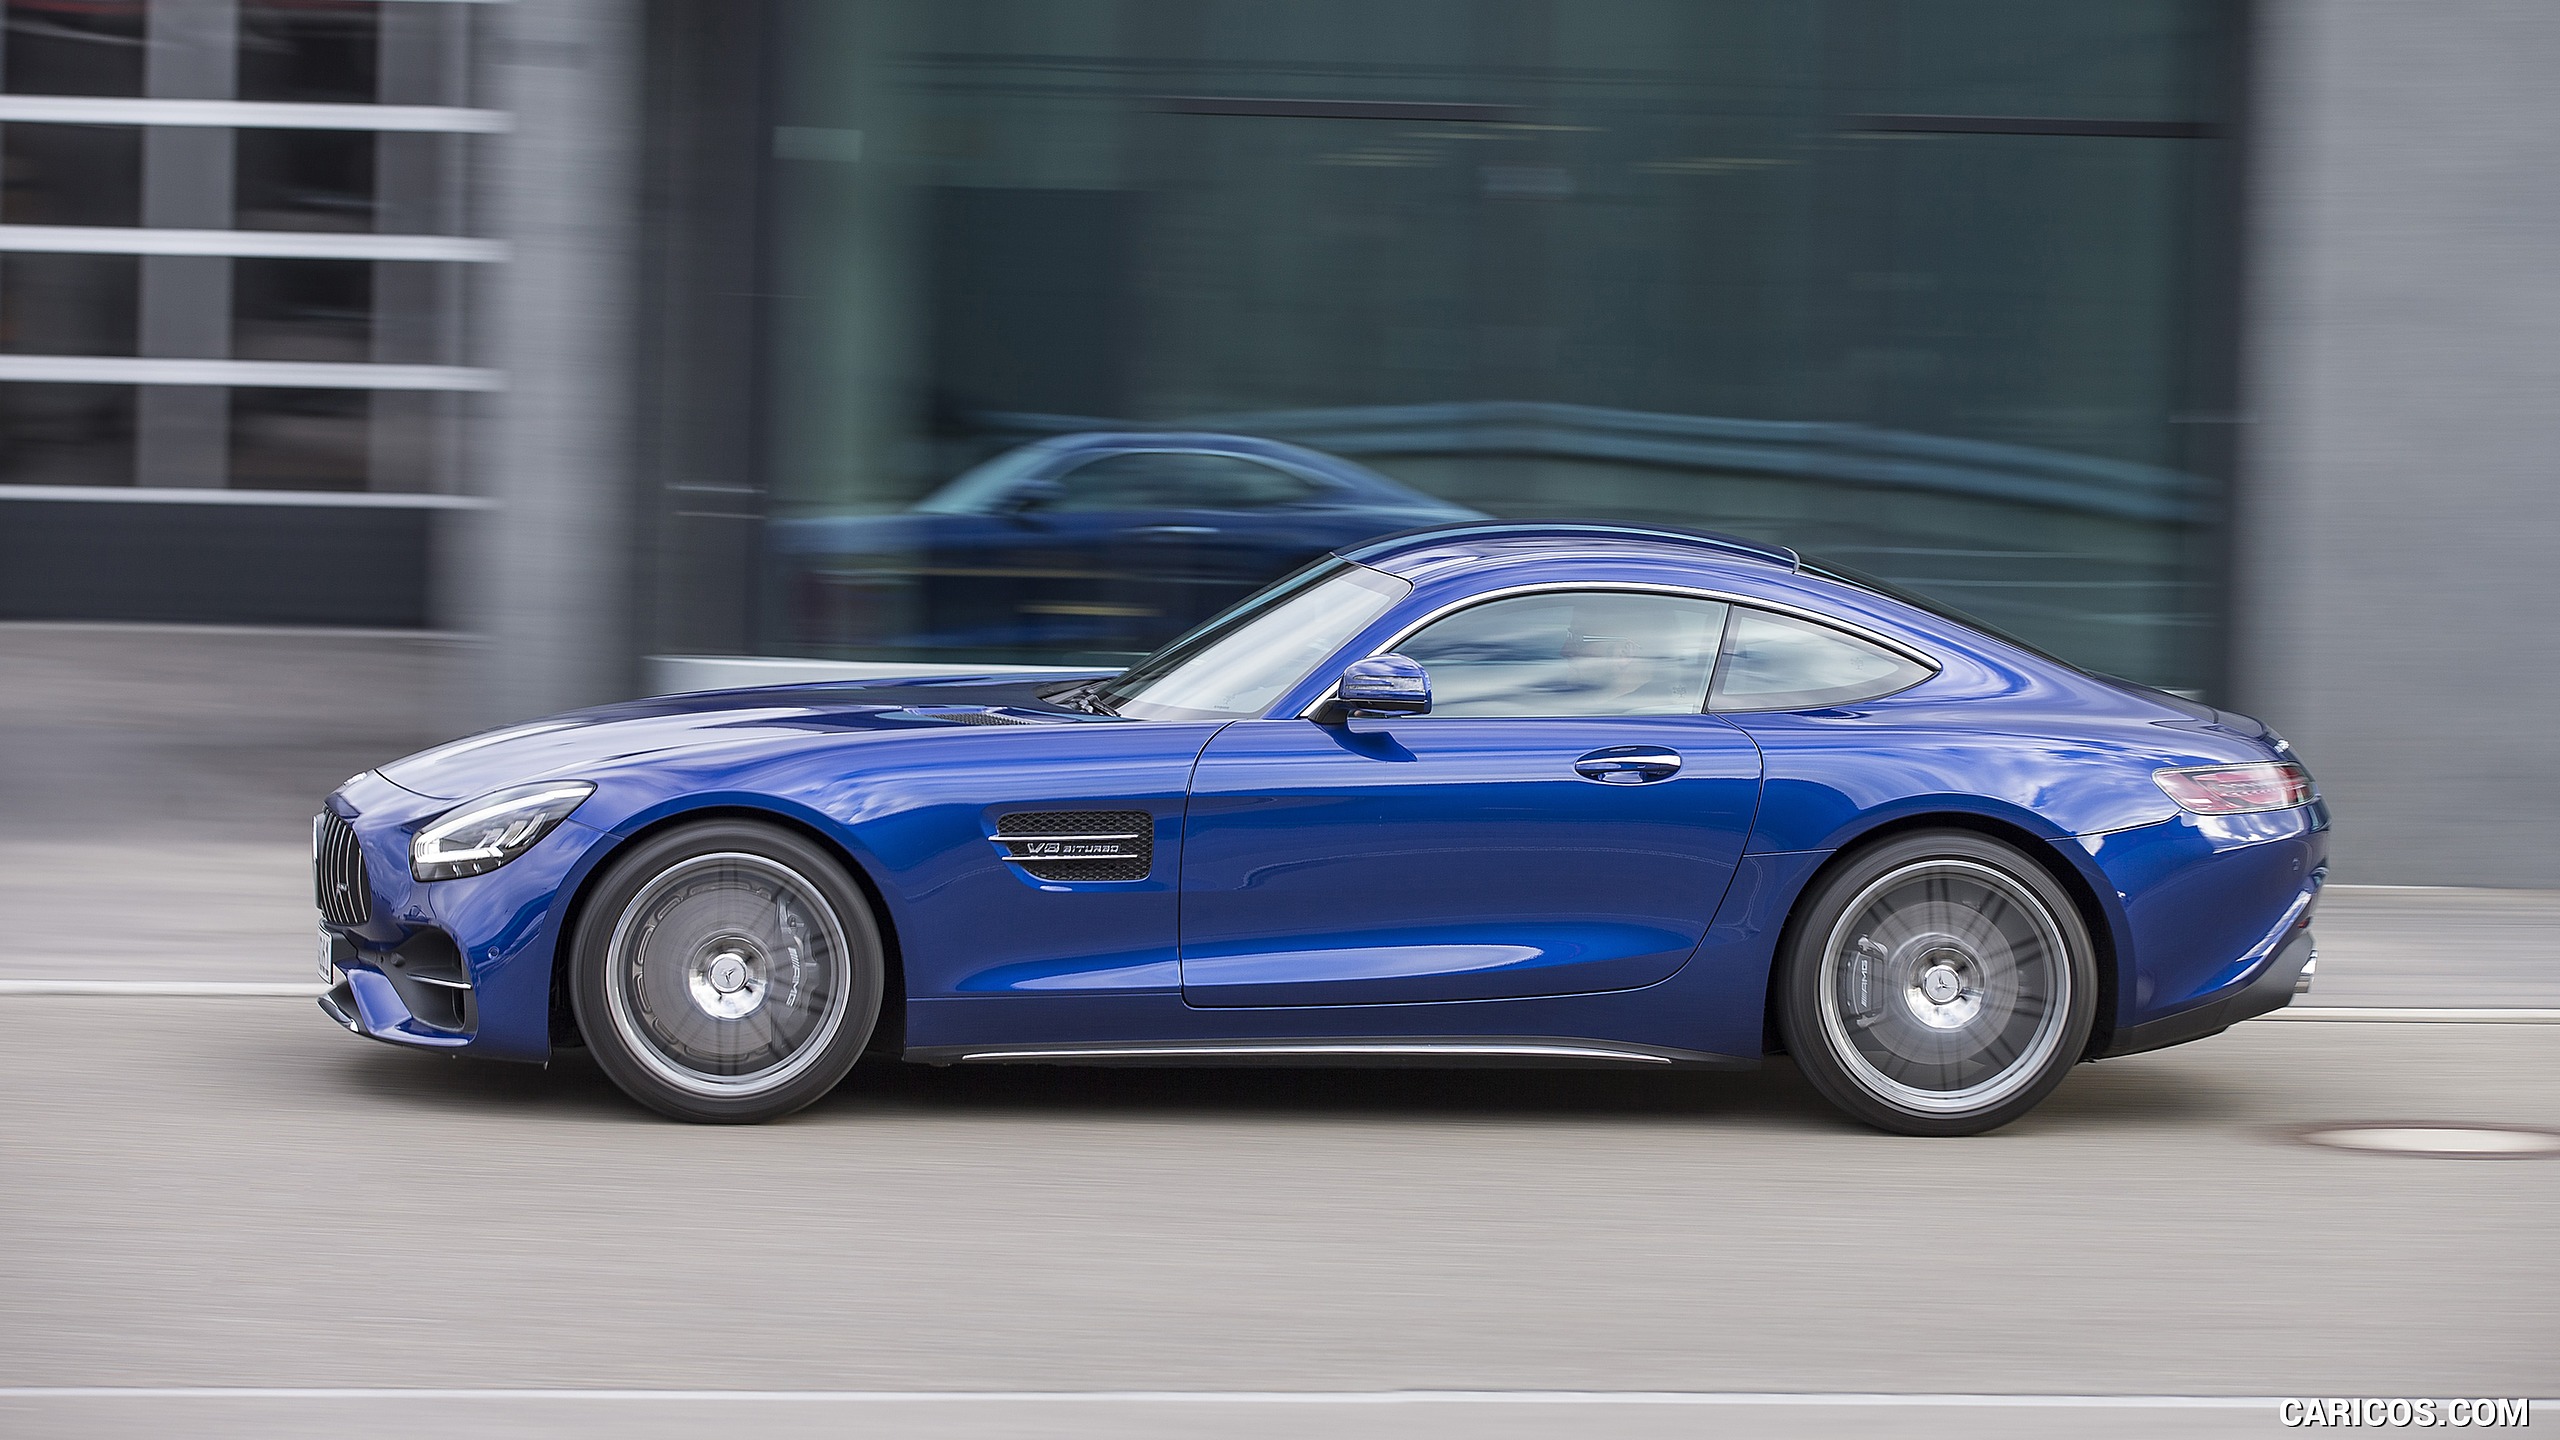 2020 Mercedes-AMG GT Coupe (Color: Brilliant Blue Metallic) - Side, #63 of 328